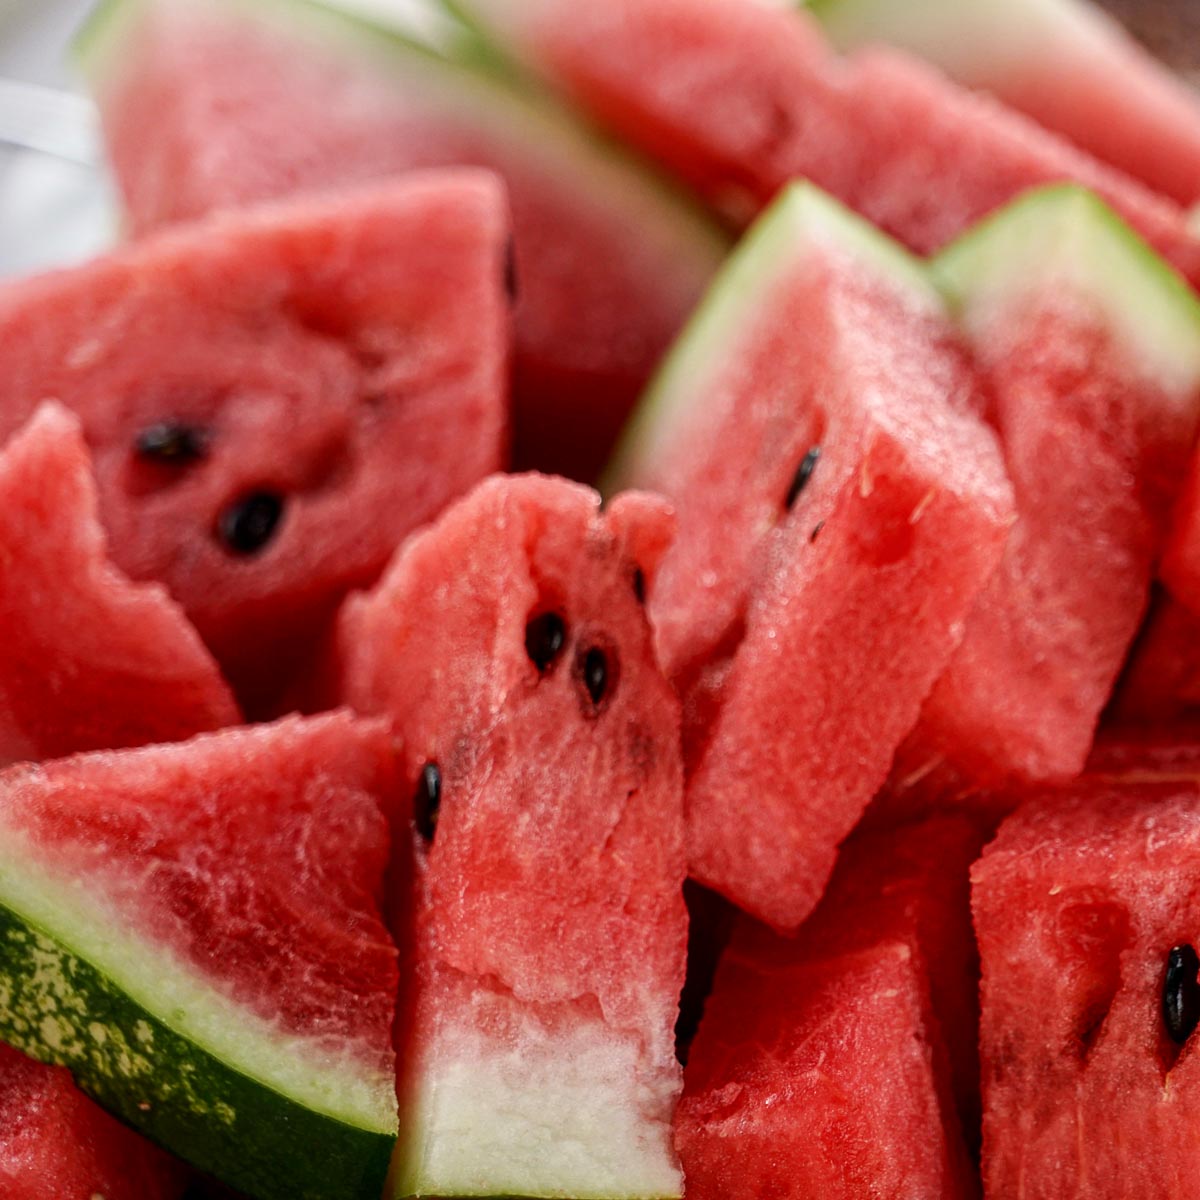 several slices of cut watermelon with the rind on.